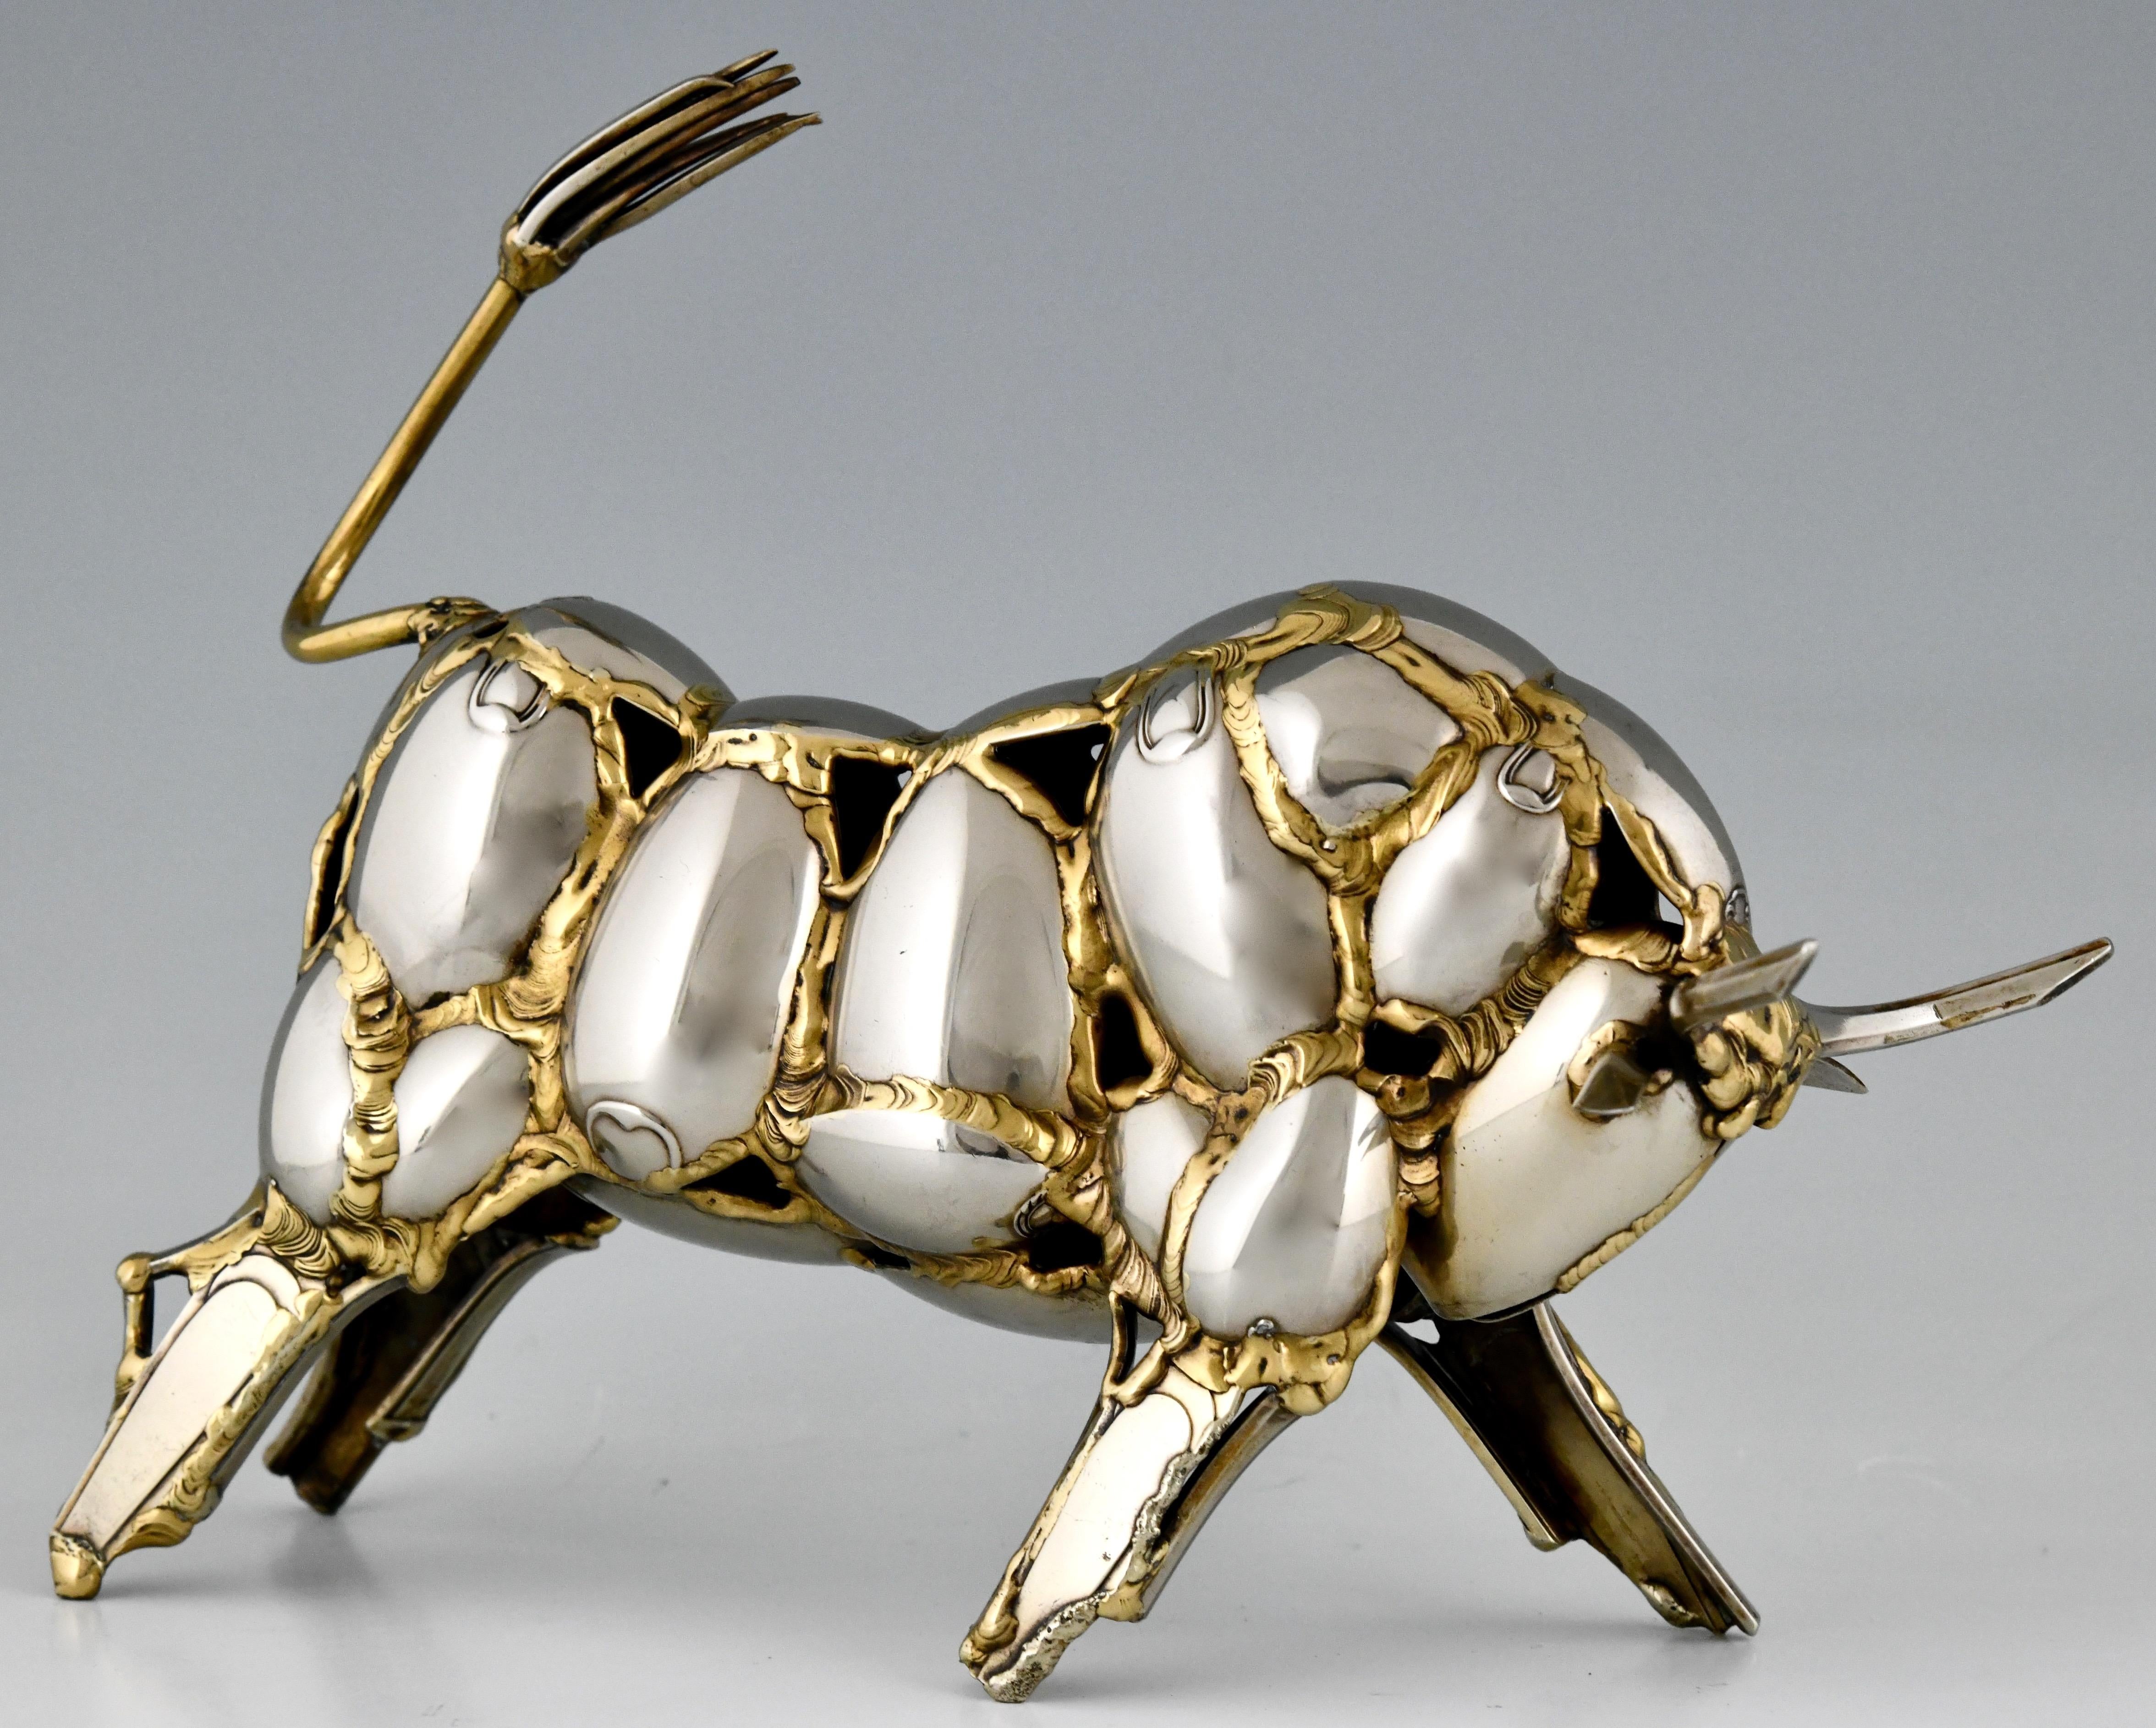 One of a kind Mid-Century Modern cutlery sculpture of a bull made of antique flatware, spoons, forks and knifes by the French Artist Gerard Bouvier, signed and dated 1985. 

 “Dictionnaire illustré des sculpteurs animaliers & fondeurs de